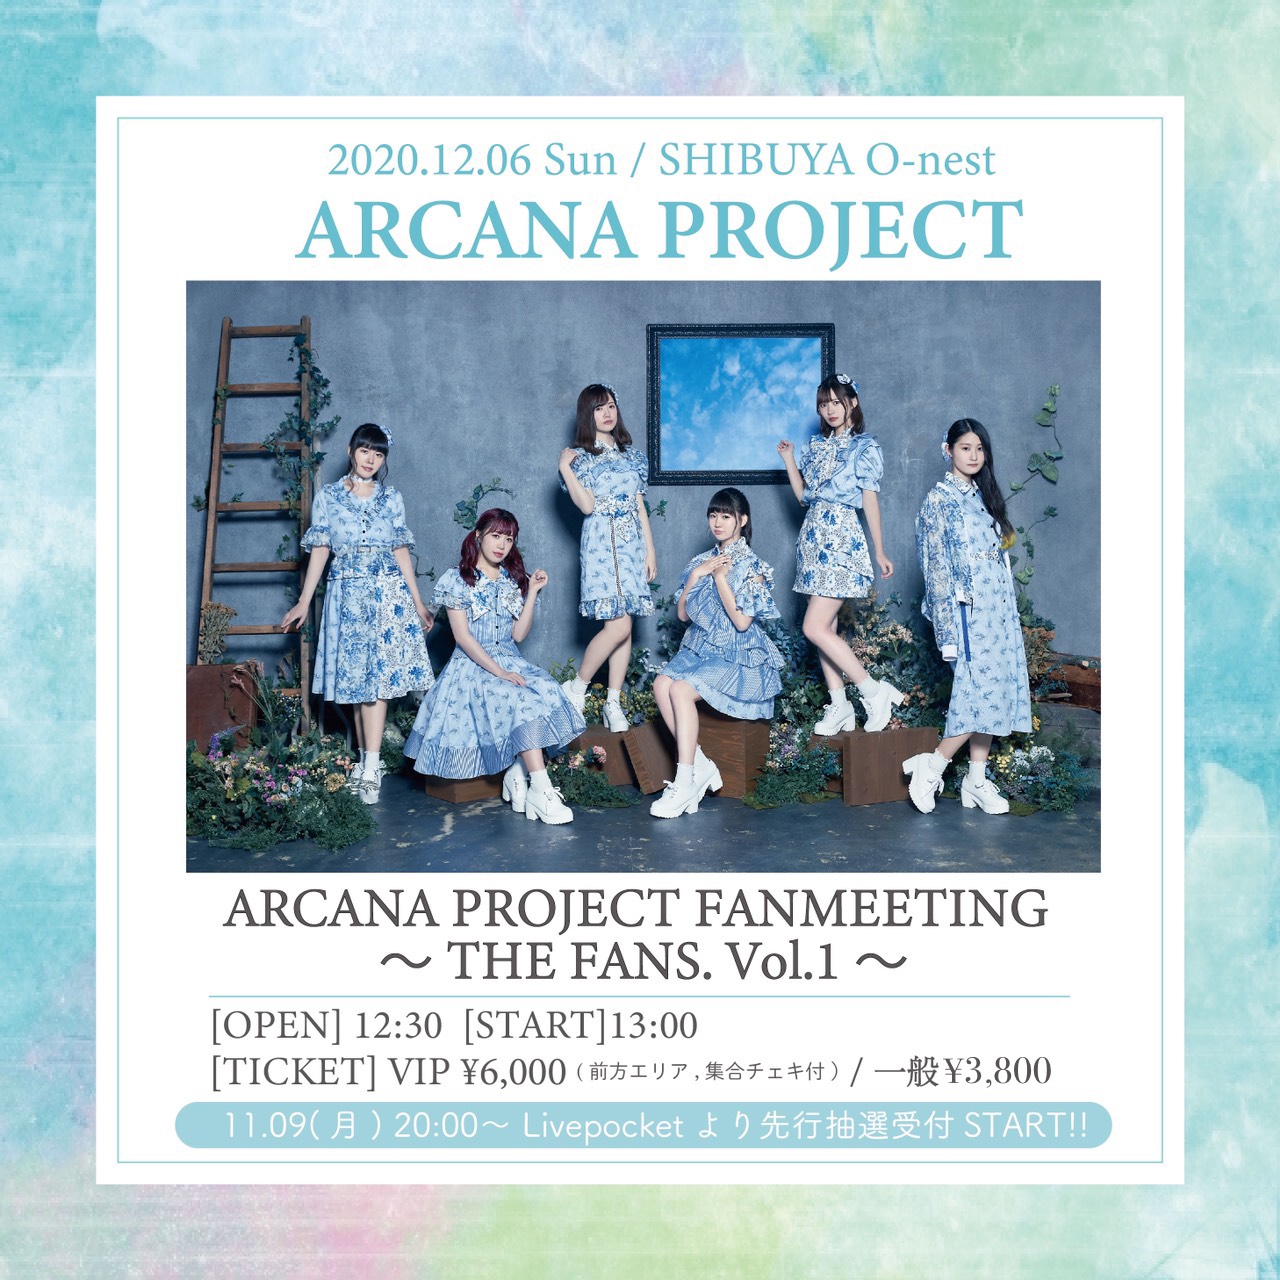 ARCANA PROJECT FANMEETING 〜THE FANS. Vol.1〜